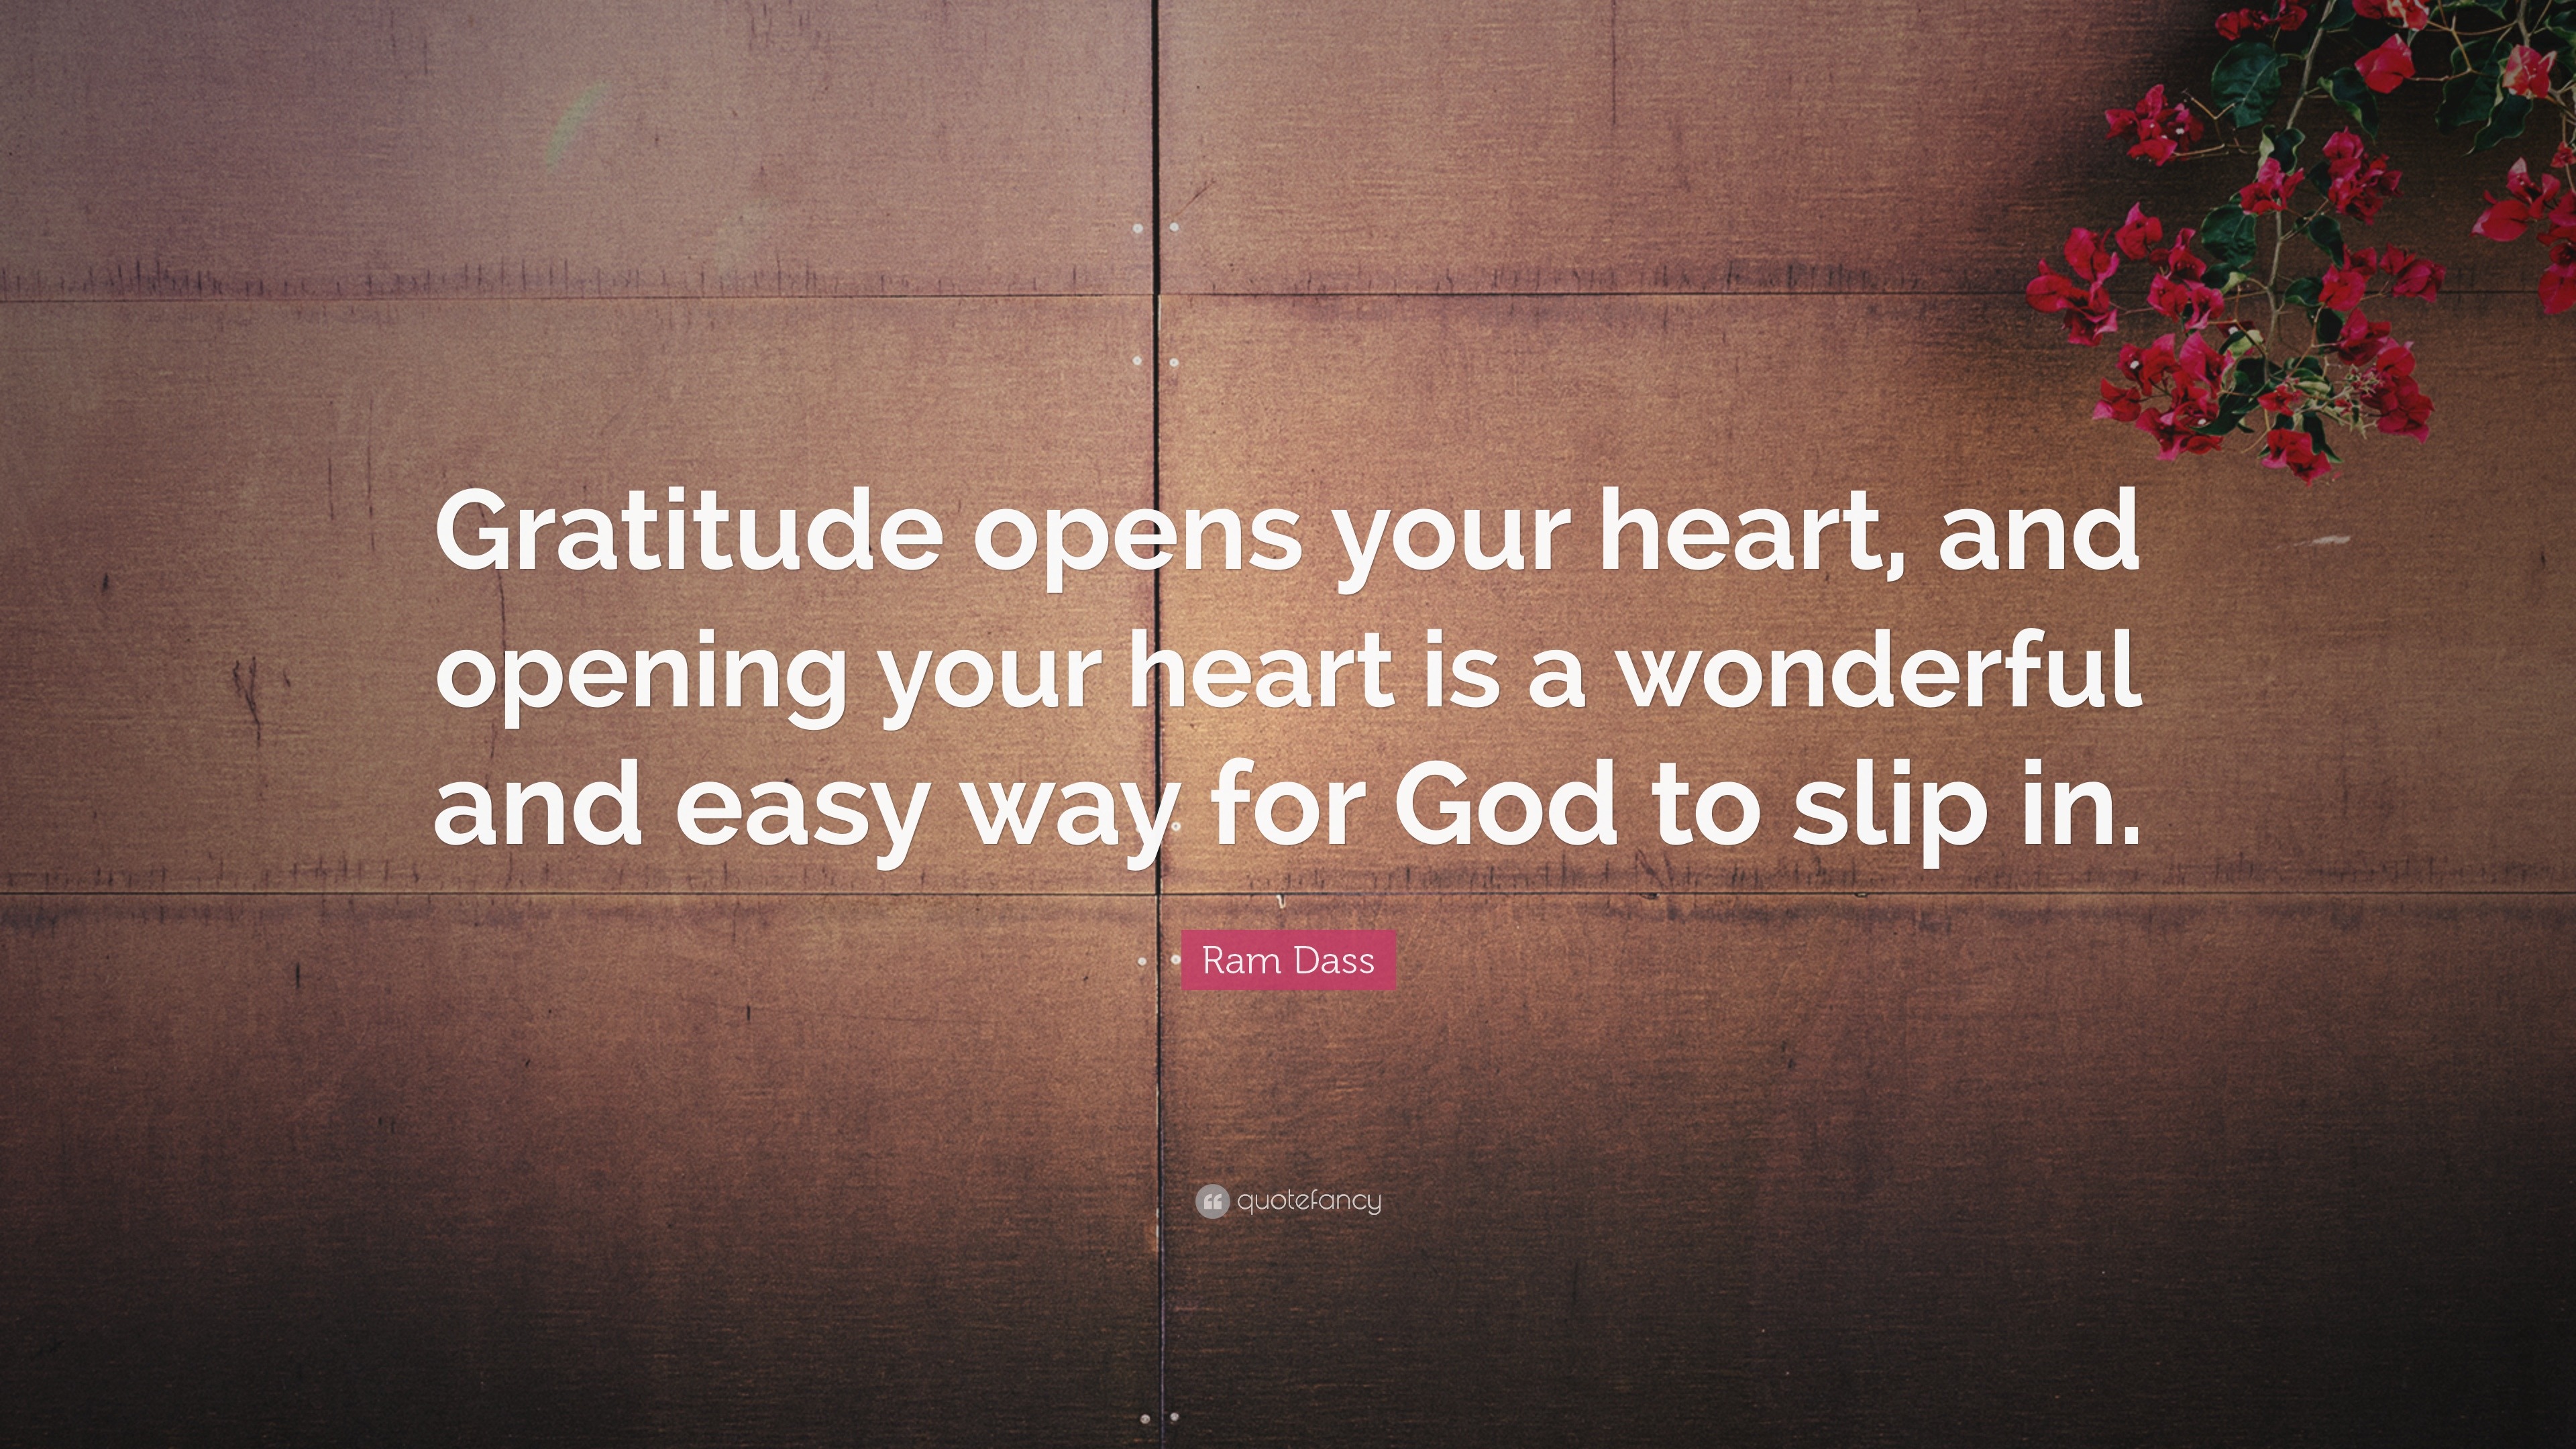 Ram Dass Quote “Gratitude opens your heart and opening your heart is a